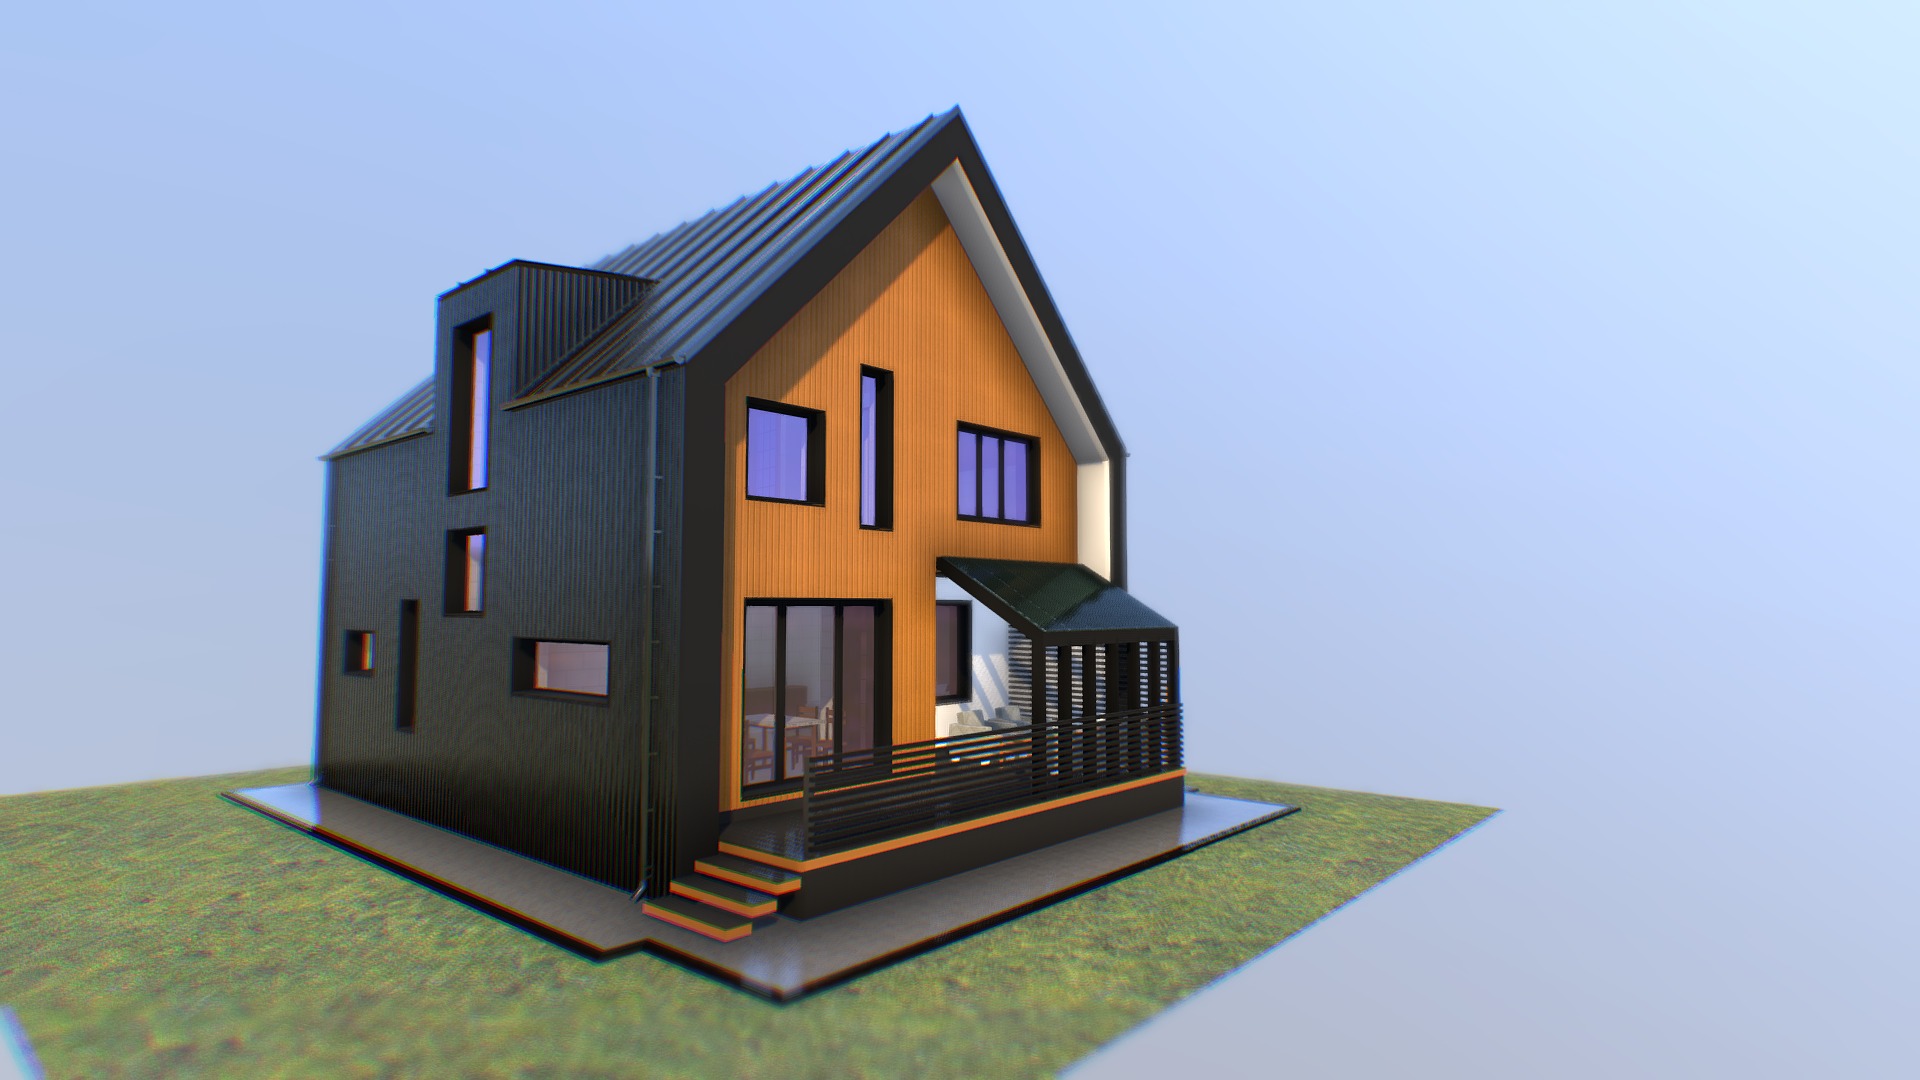 3D model Smart5 1 - This is a 3D model of the Smart5 1. The 3D model is about a house with a grass lawn.